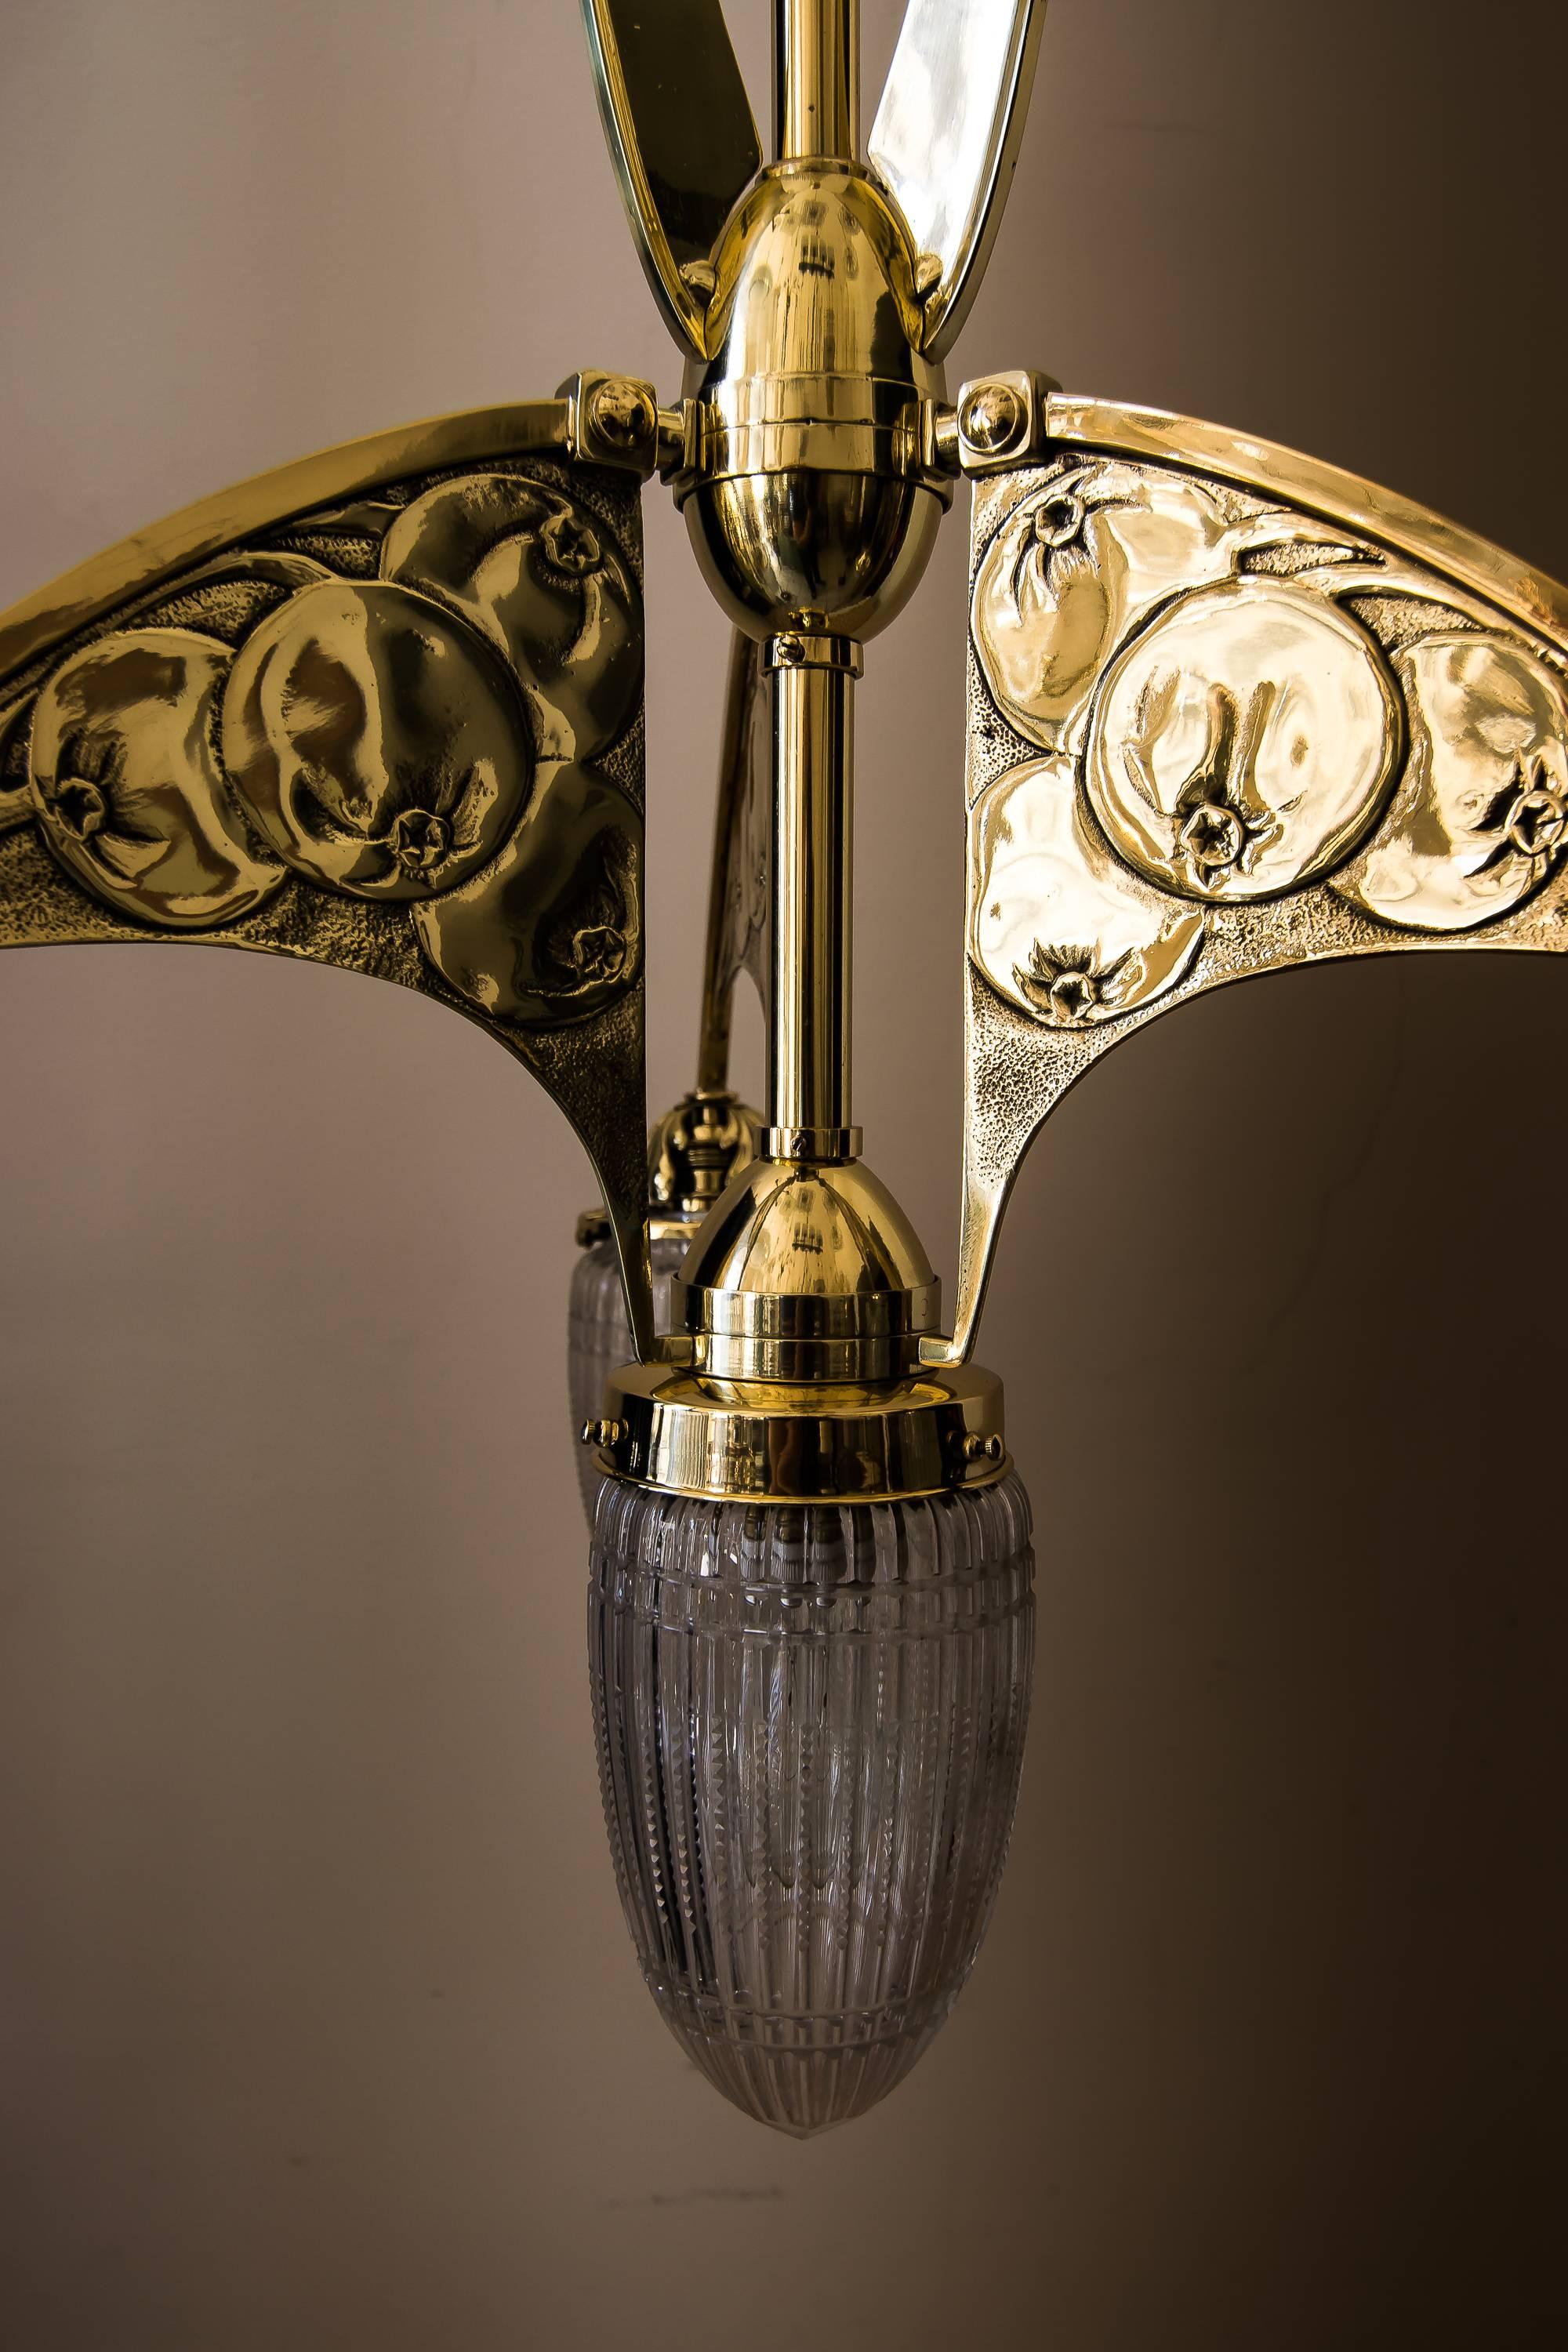 Early 20th Century Beautiful Art Nouveau Chandelier with Original Glass, circa 1908